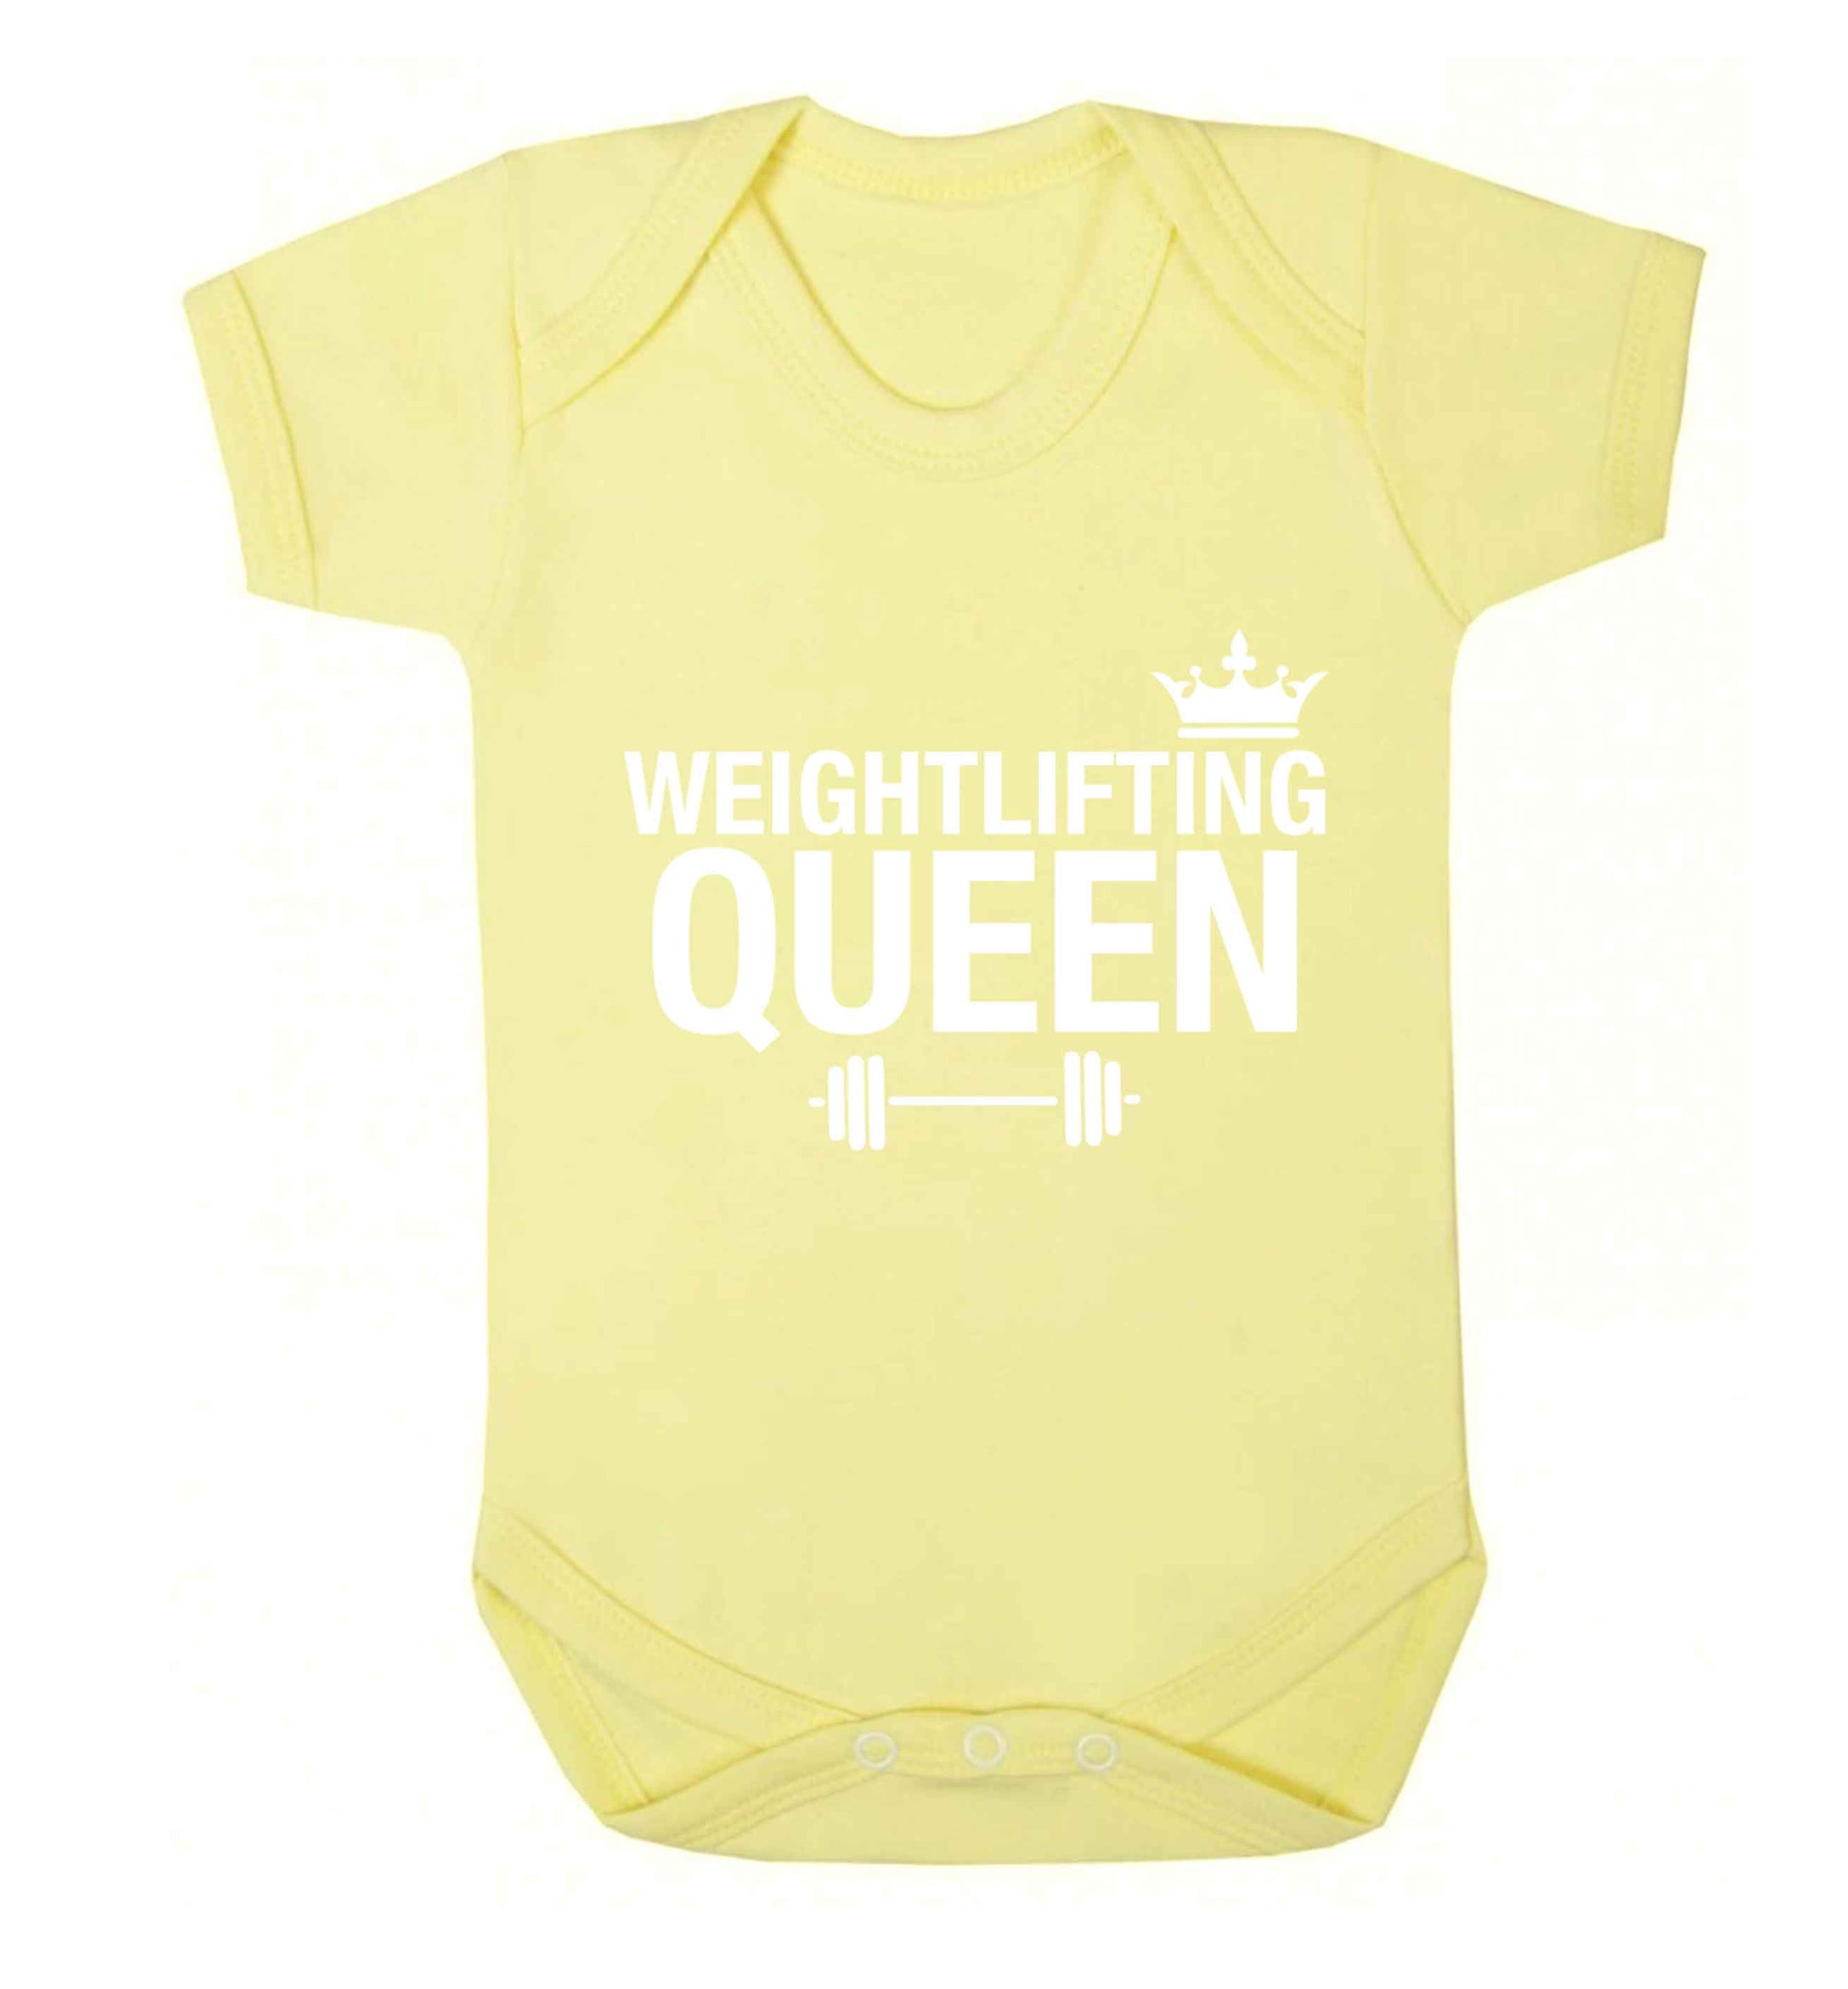 Weightlifting Queen Baby Vest pale yellow 18-24 months